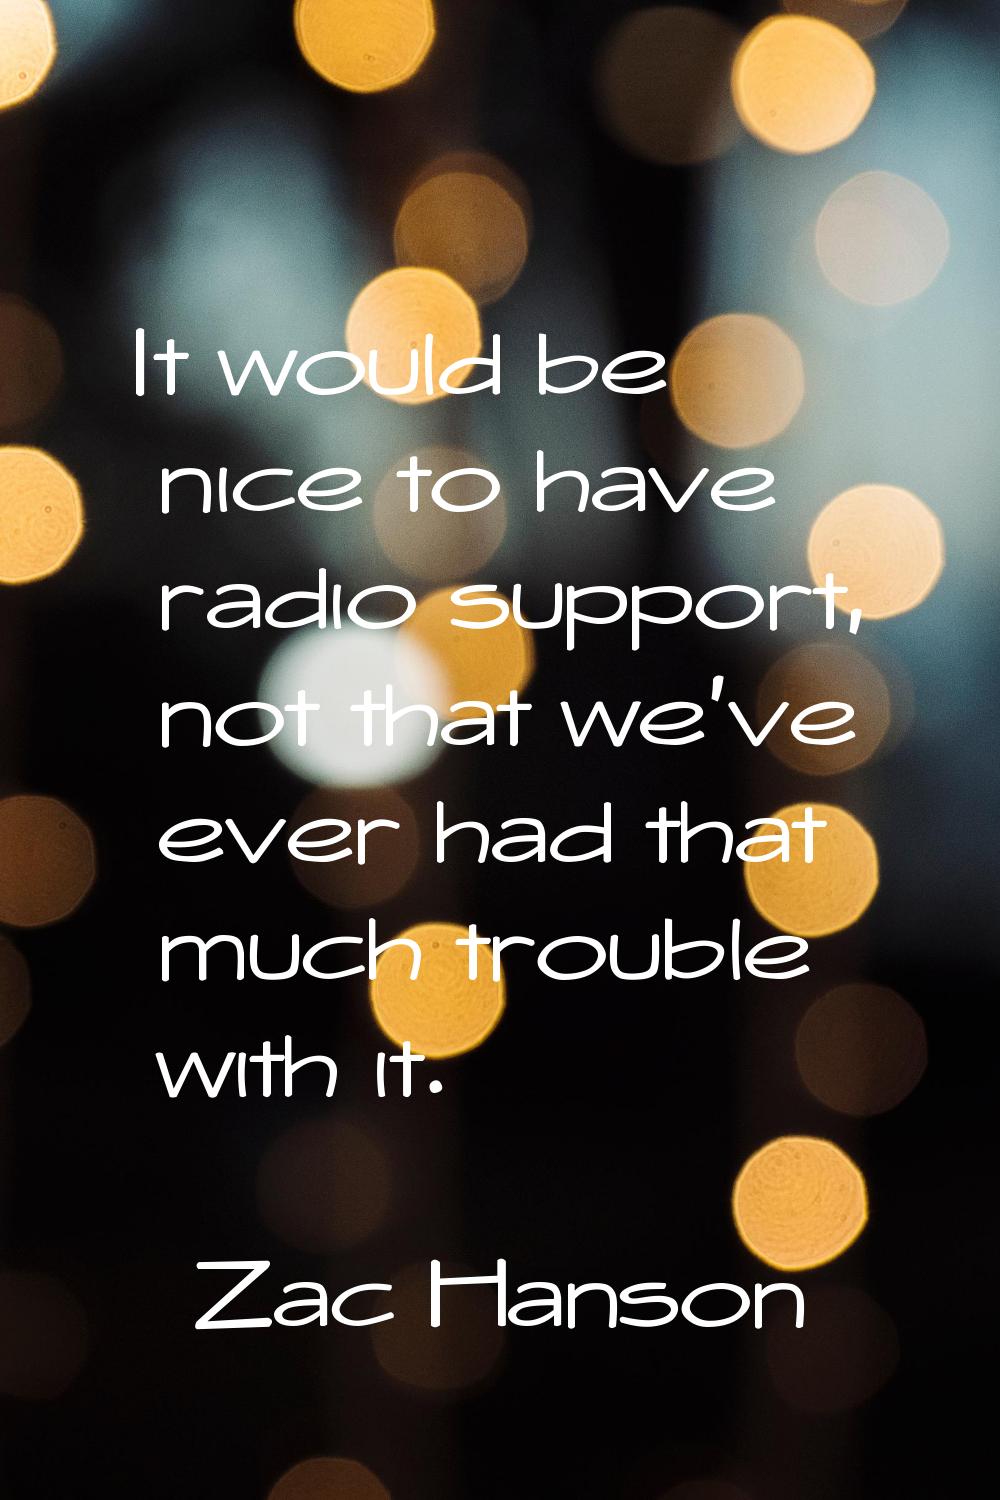 It would be nice to have radio support, not that we've ever had that much trouble with it.